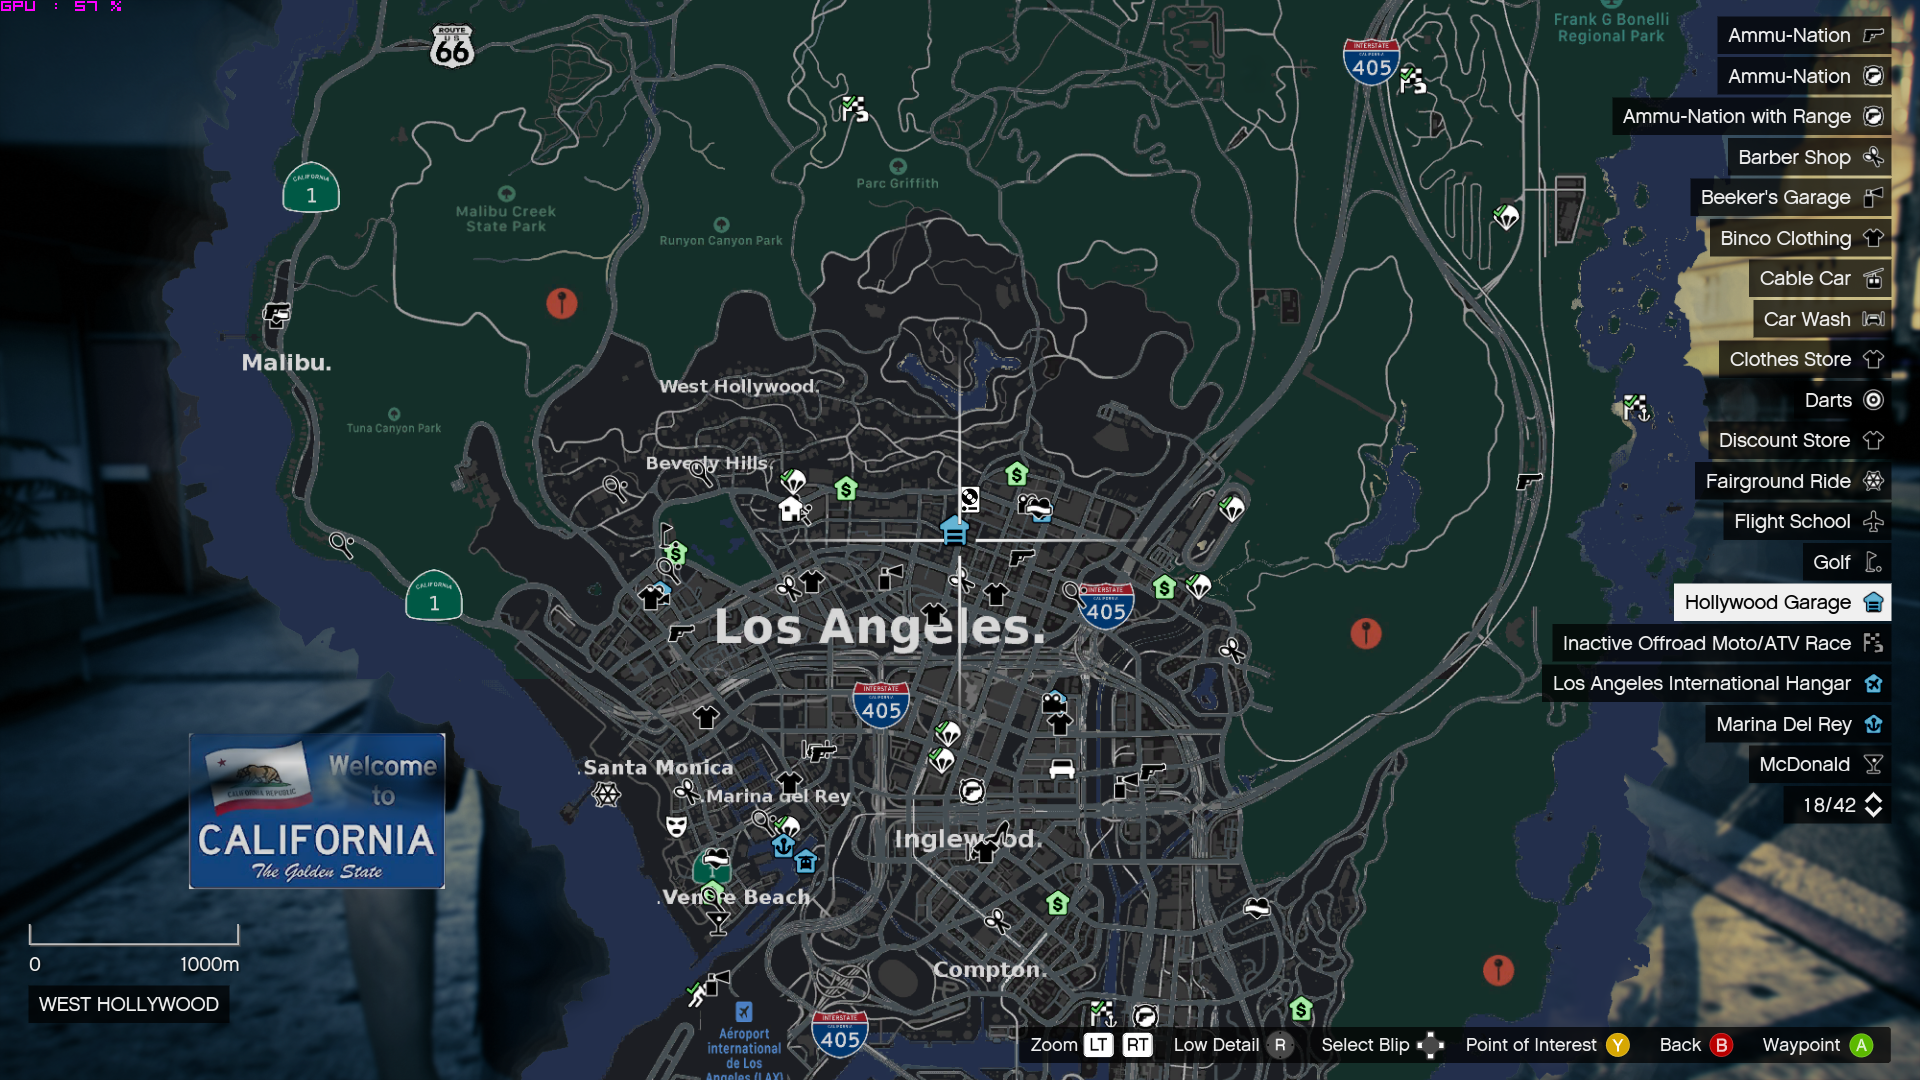 How Well Does GTA V's Map Emulate Los Angeles? - GTA BOOM